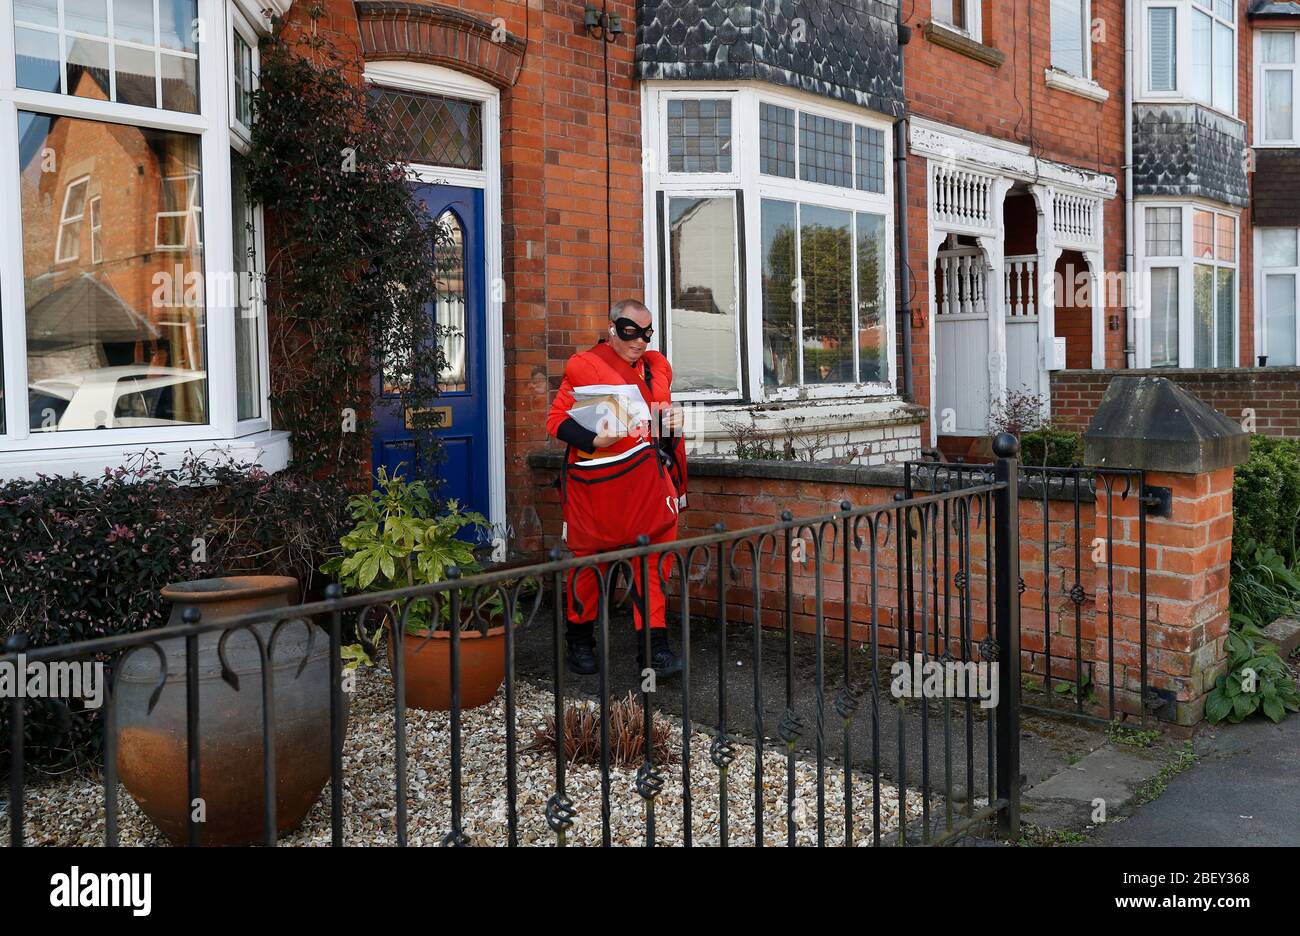 Loughborough, Leicestershire, UK. 16th April 2020. Royal Mail Postman Kevin Allen wears Mr Incredible fancy dress in support of the NHS as he delivers post during the coronavirus pandemic lockdown. Credit Darren Staples/Alamy Live News. Stock Photo